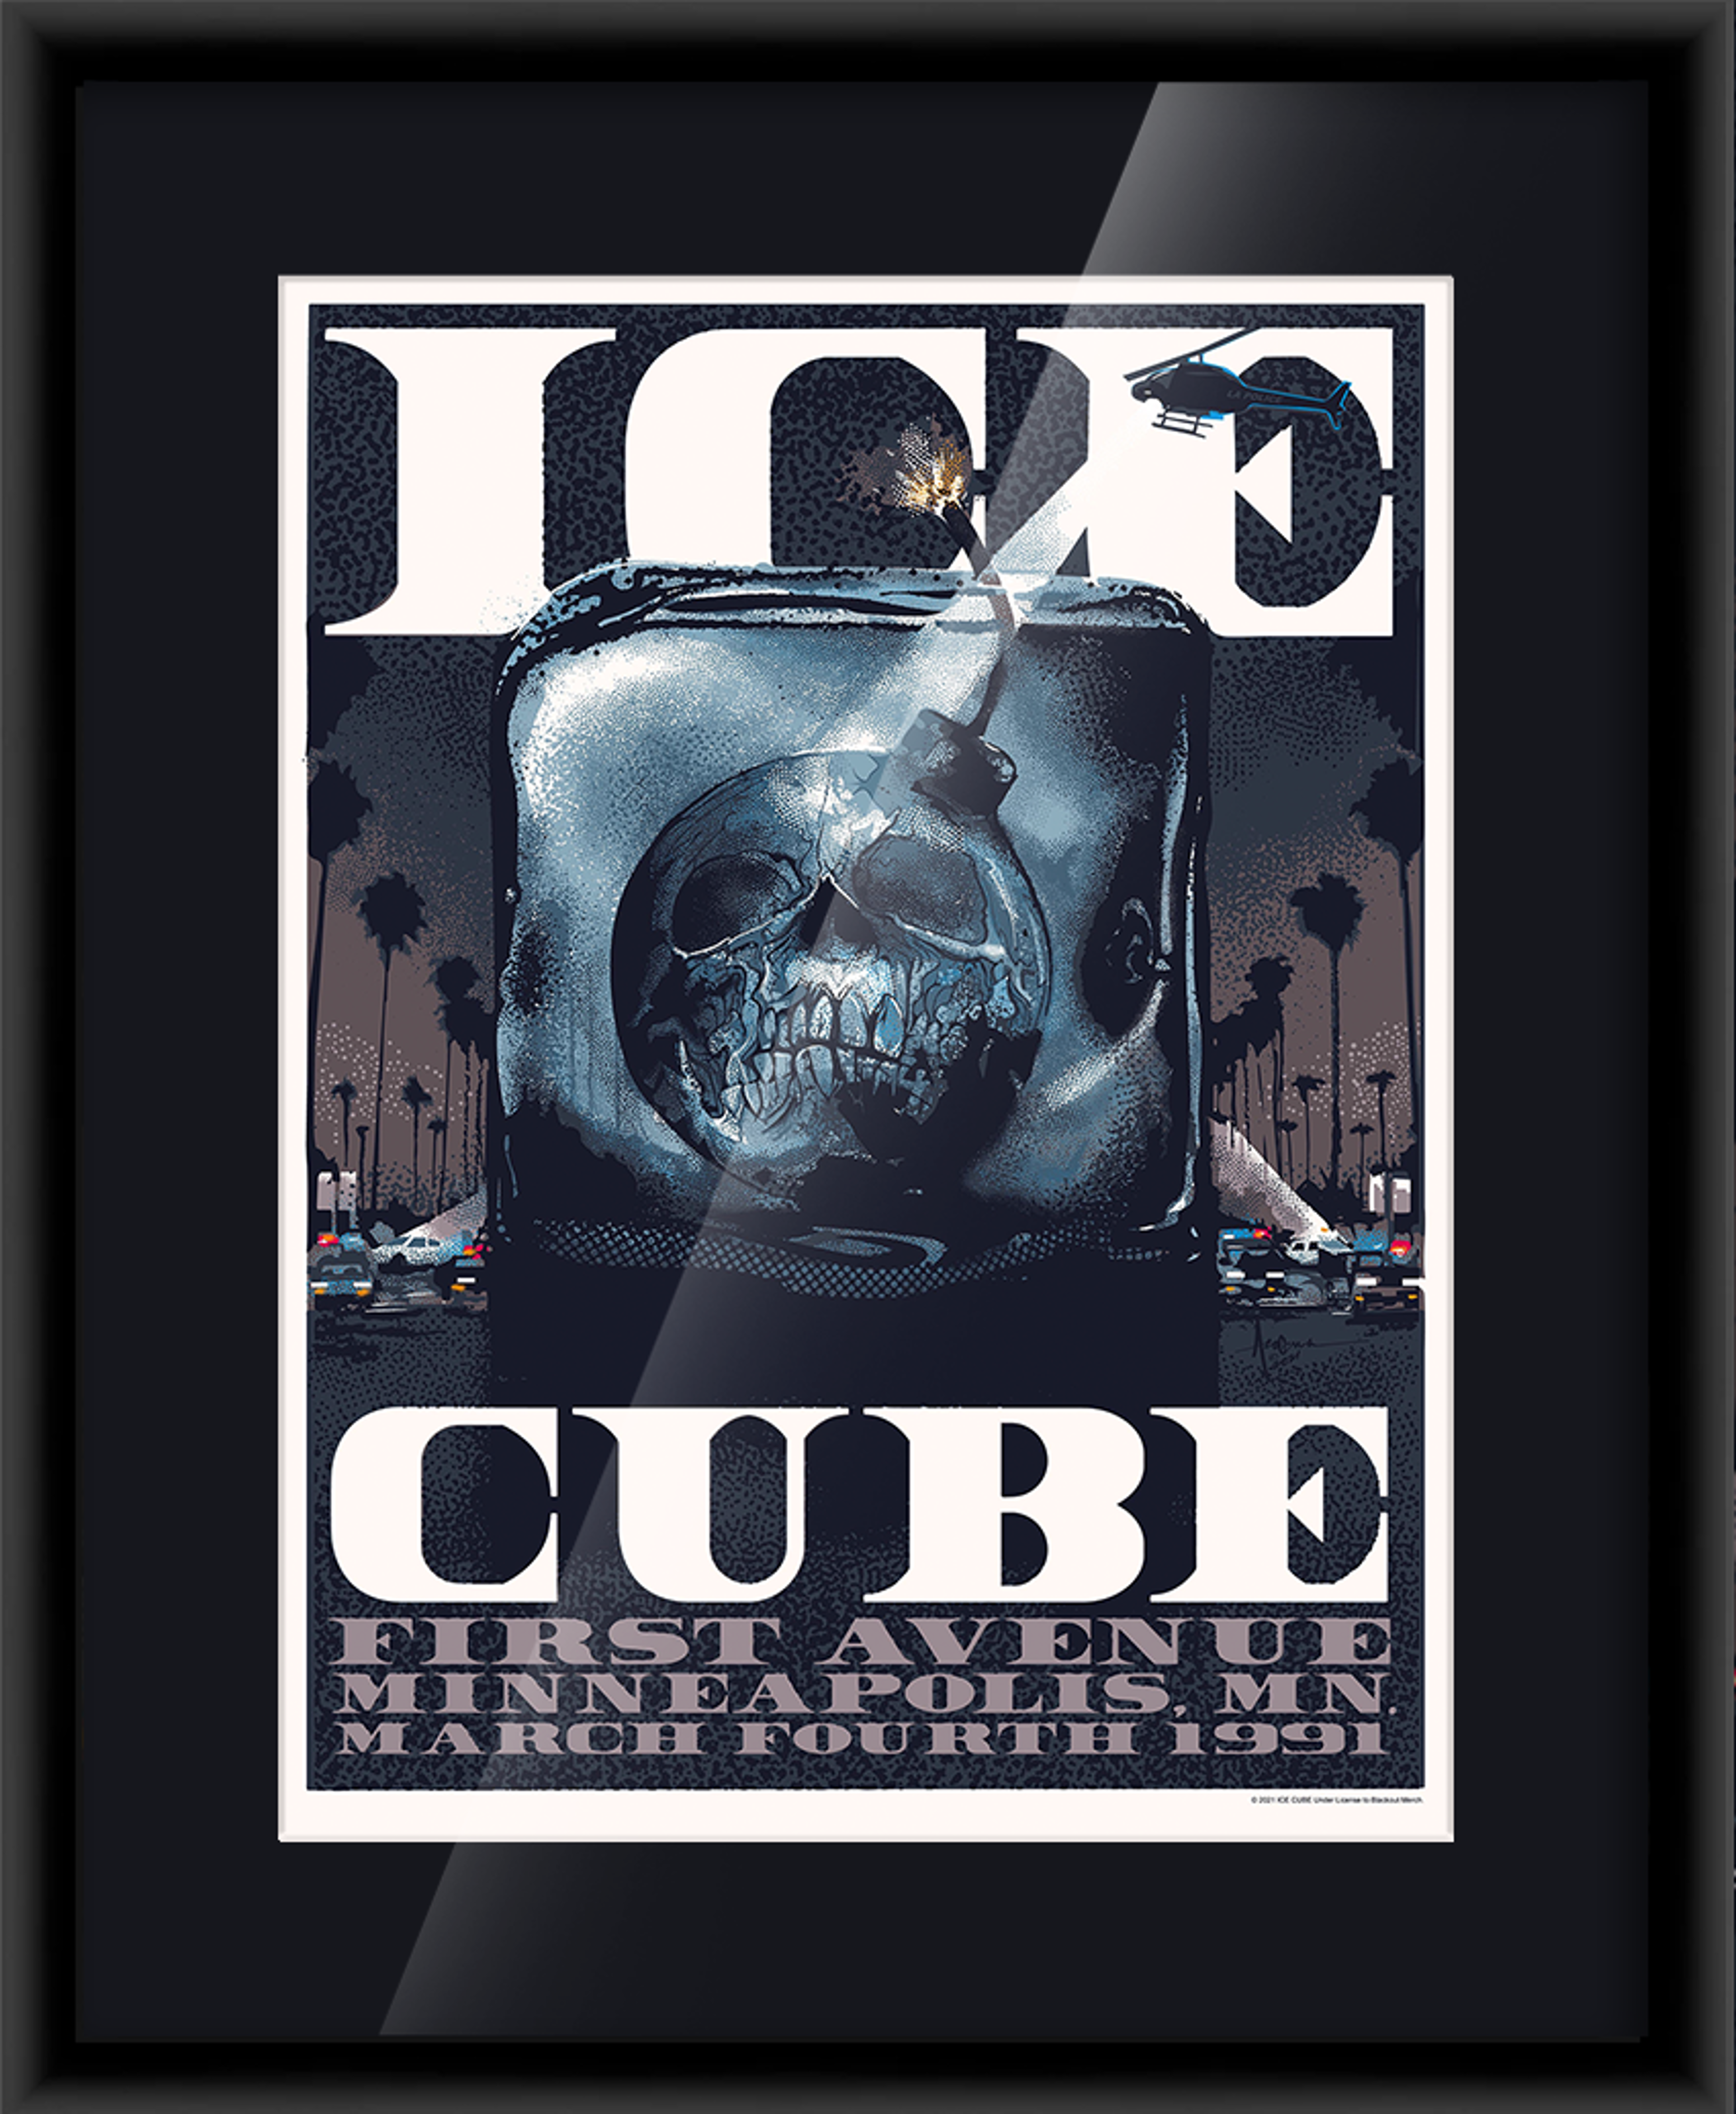 Alternate View 1 of Ice Cube "THE BOMB" Minneapolis 1991 (Main Edition)